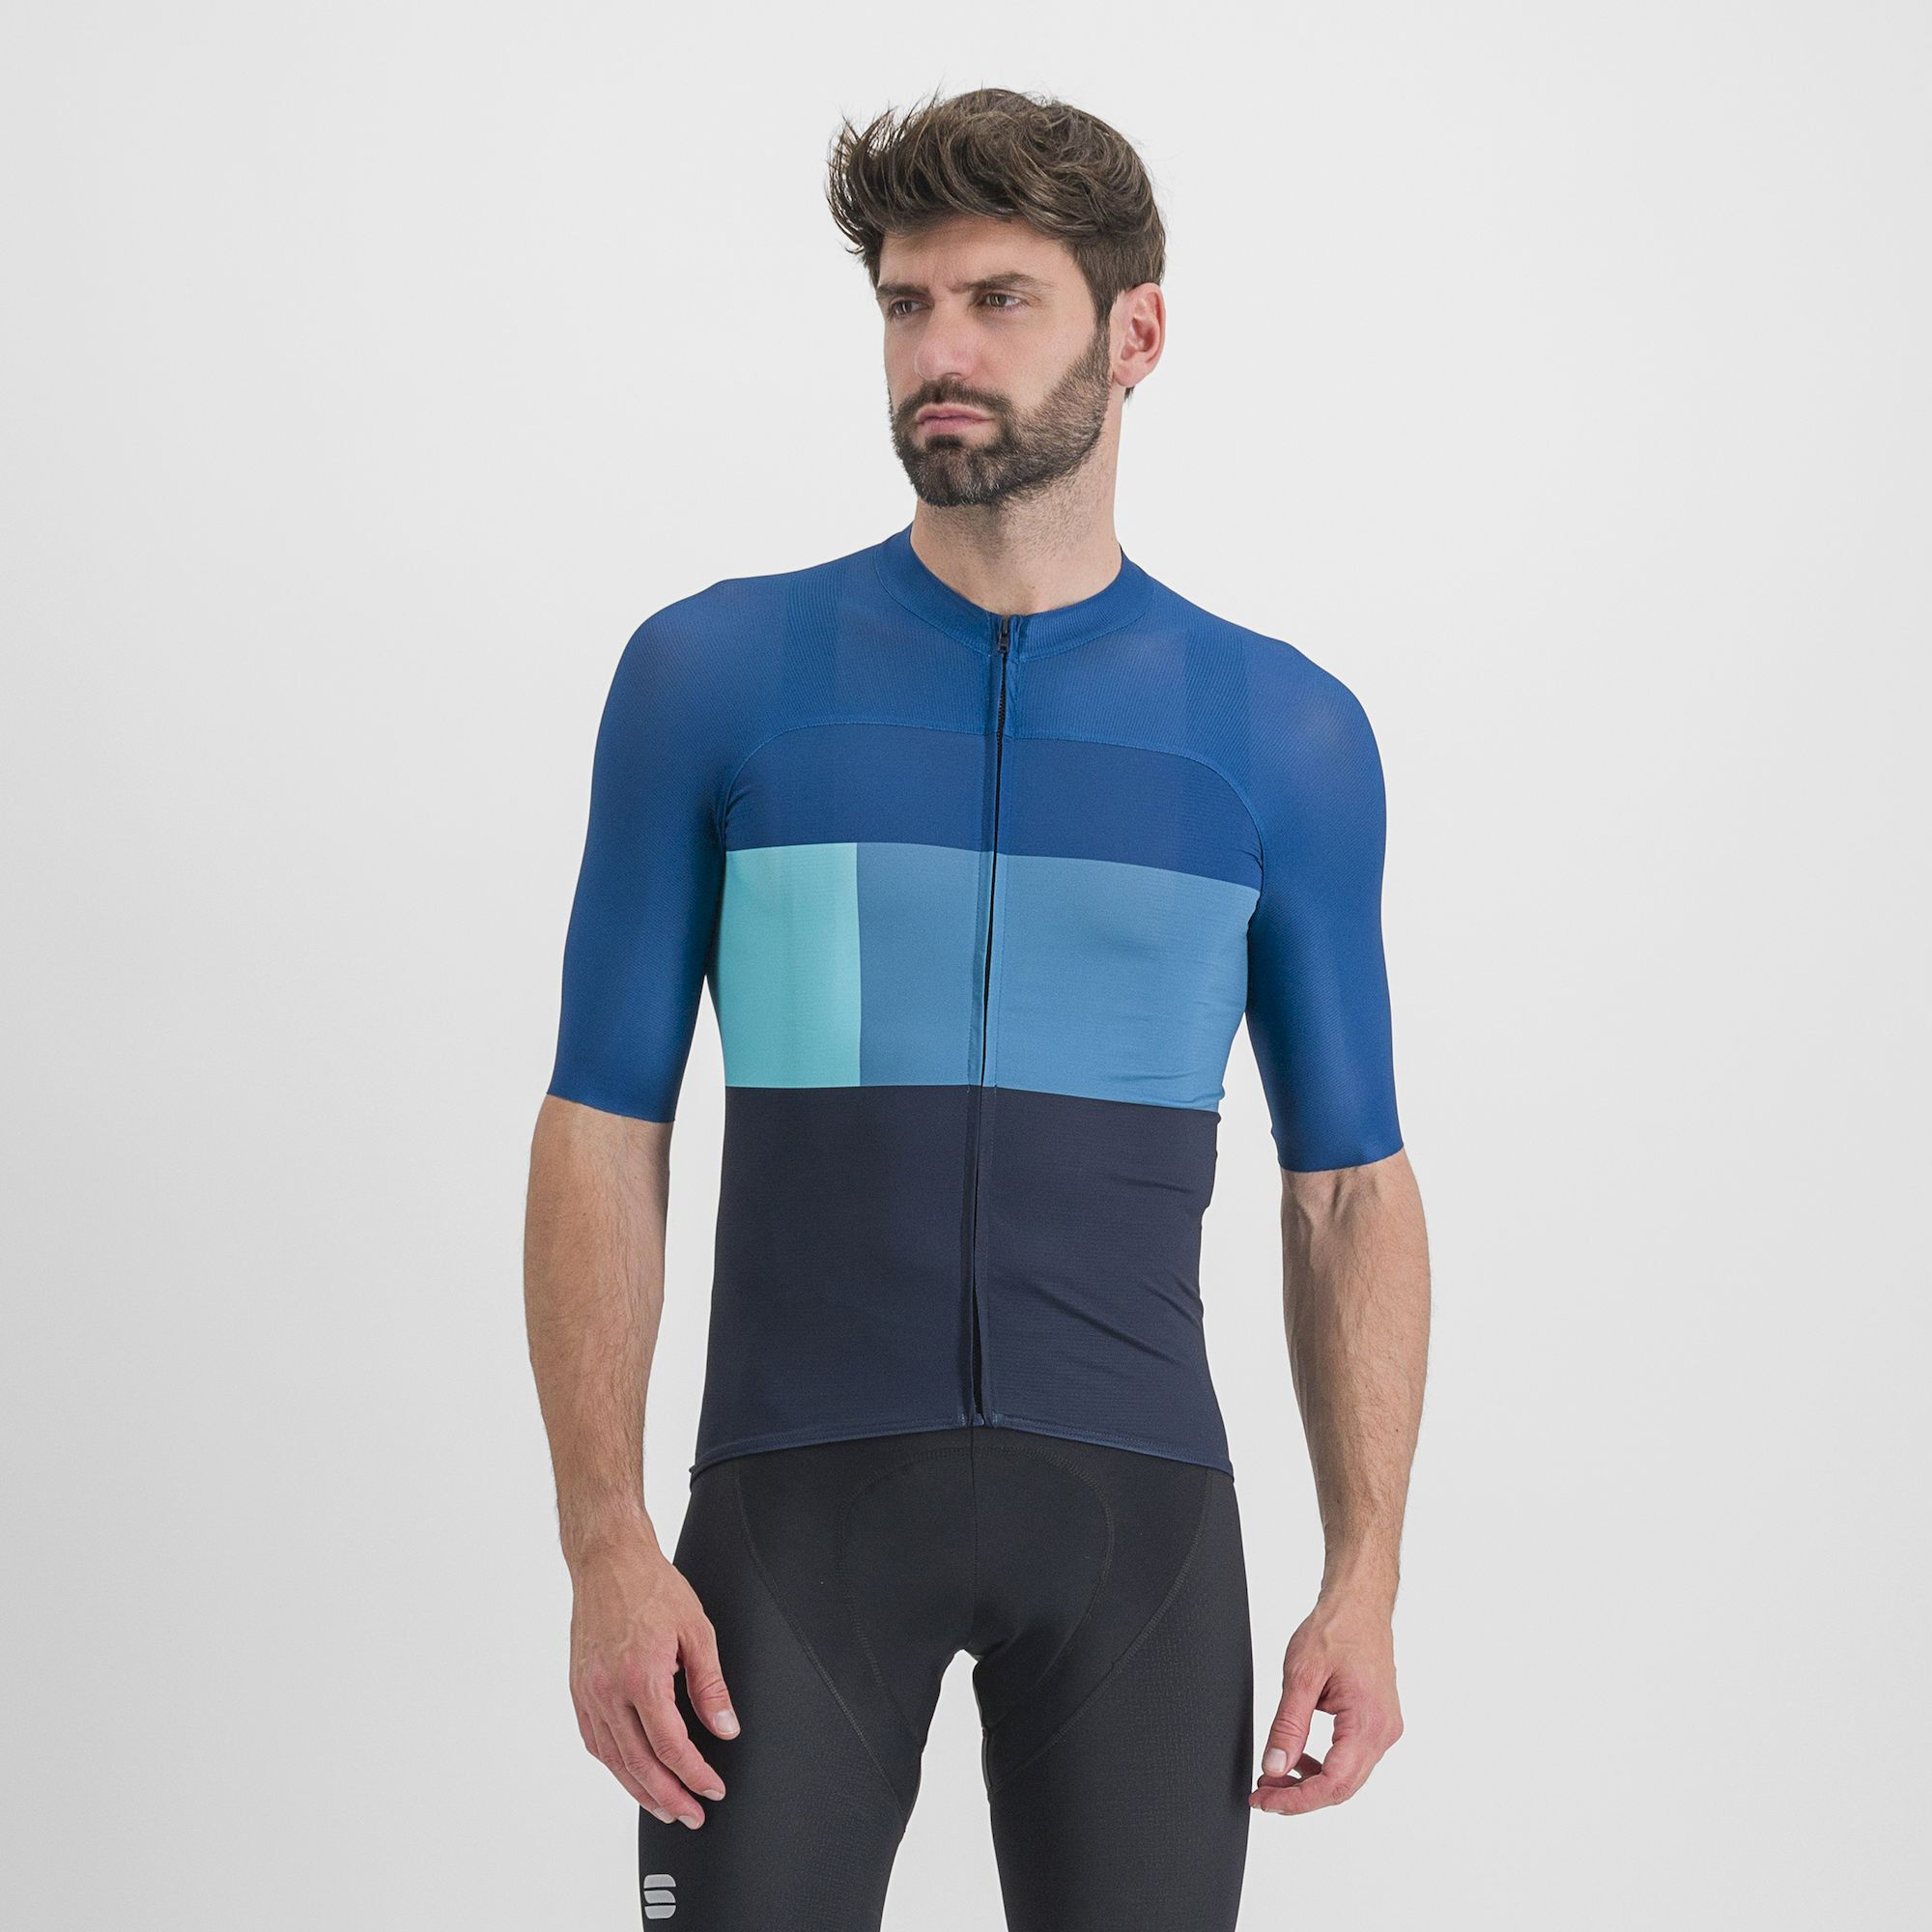 Sportful Snap Jersey - Maillot ciclismo - Hombre | Hardloop